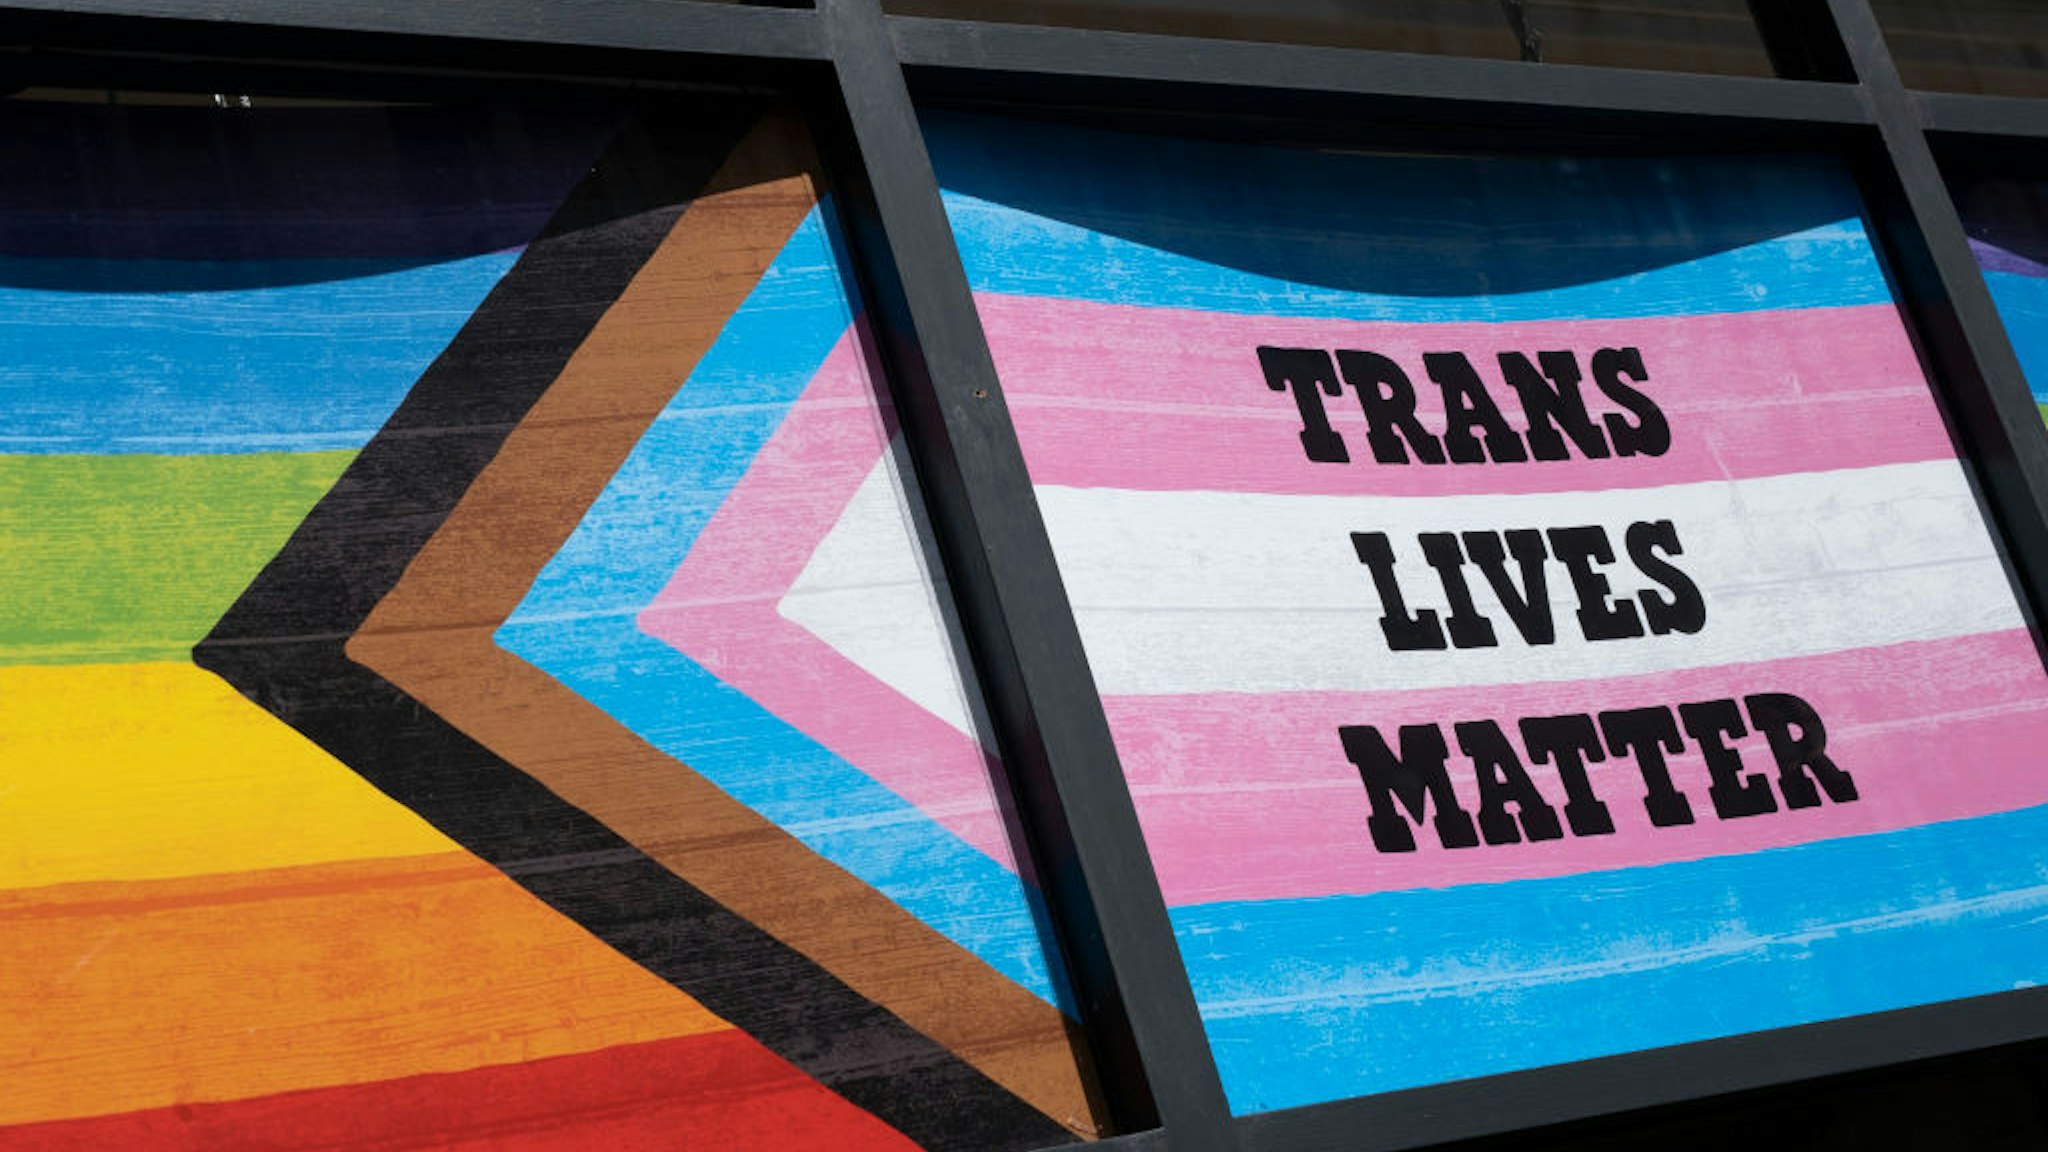 Pride Progress flag alongside the Transgender Pride flag with the slogan 'Trans Lives Matter' in Soho on 28th June 2022 in London, United Kingdom. The flag includes the rainbow flag stripes to represent LGBTQ+ communities, with colors from the Transgender Pride Flag and to also represent people of colour. The transgender flag is a light blue, pink and white pentacolour pride flag representing the transgender community, organizations, and individuals. (photo by Mike Kemp/In Pictures via Getty Images)